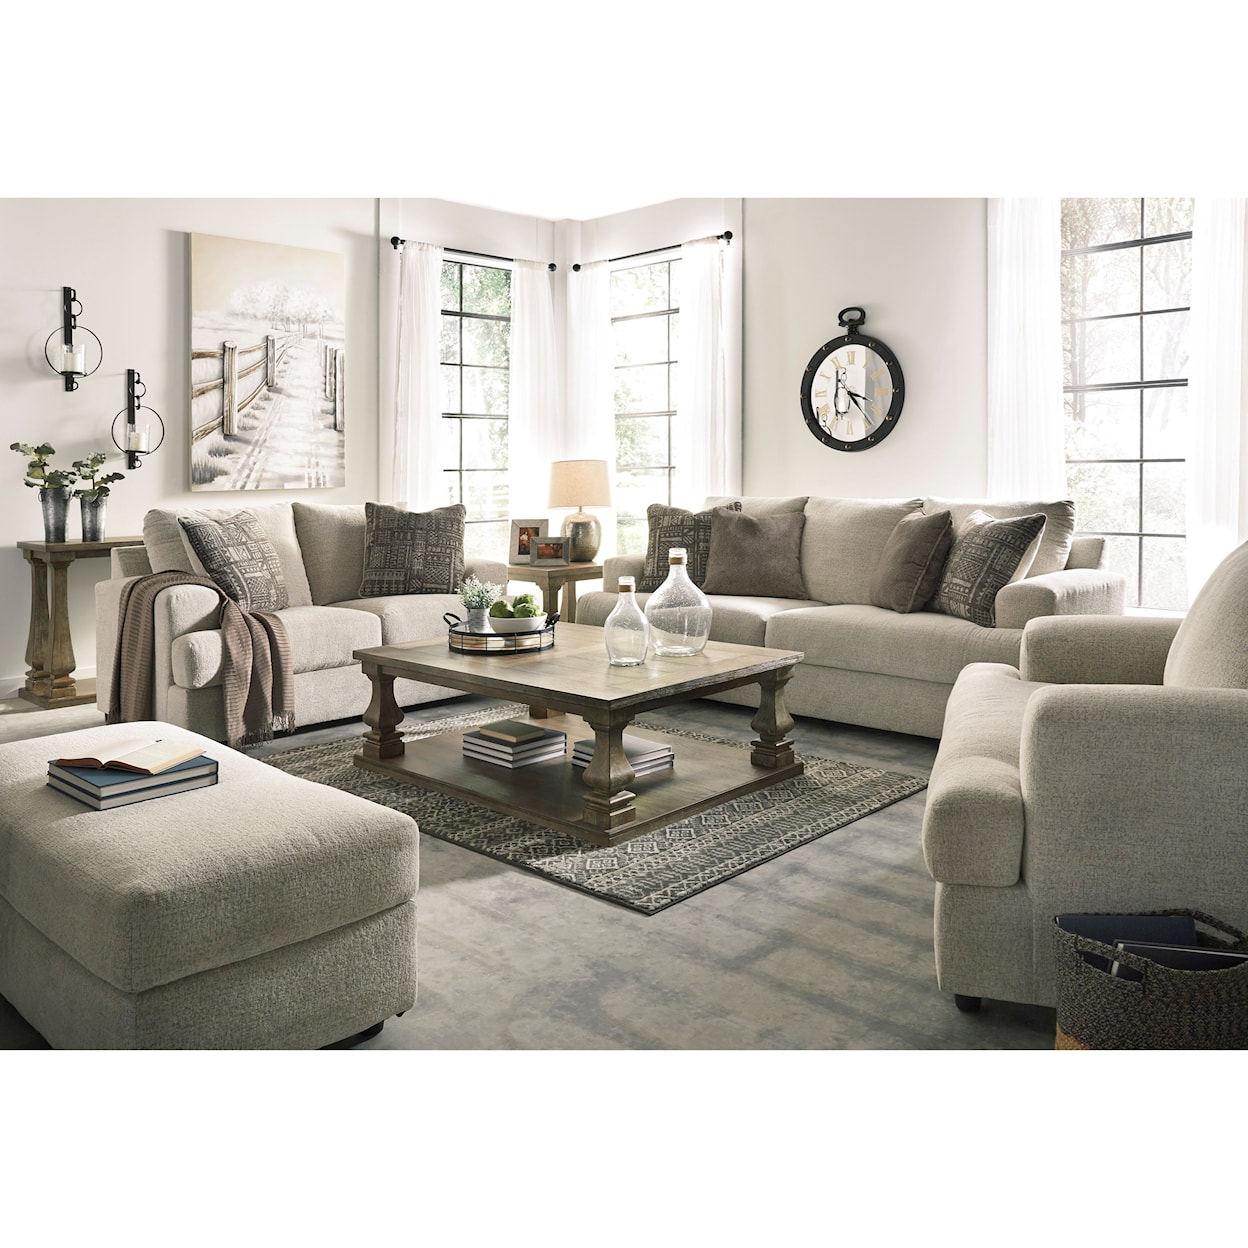 Signature Design by Ashley Soletren 4pc living room group